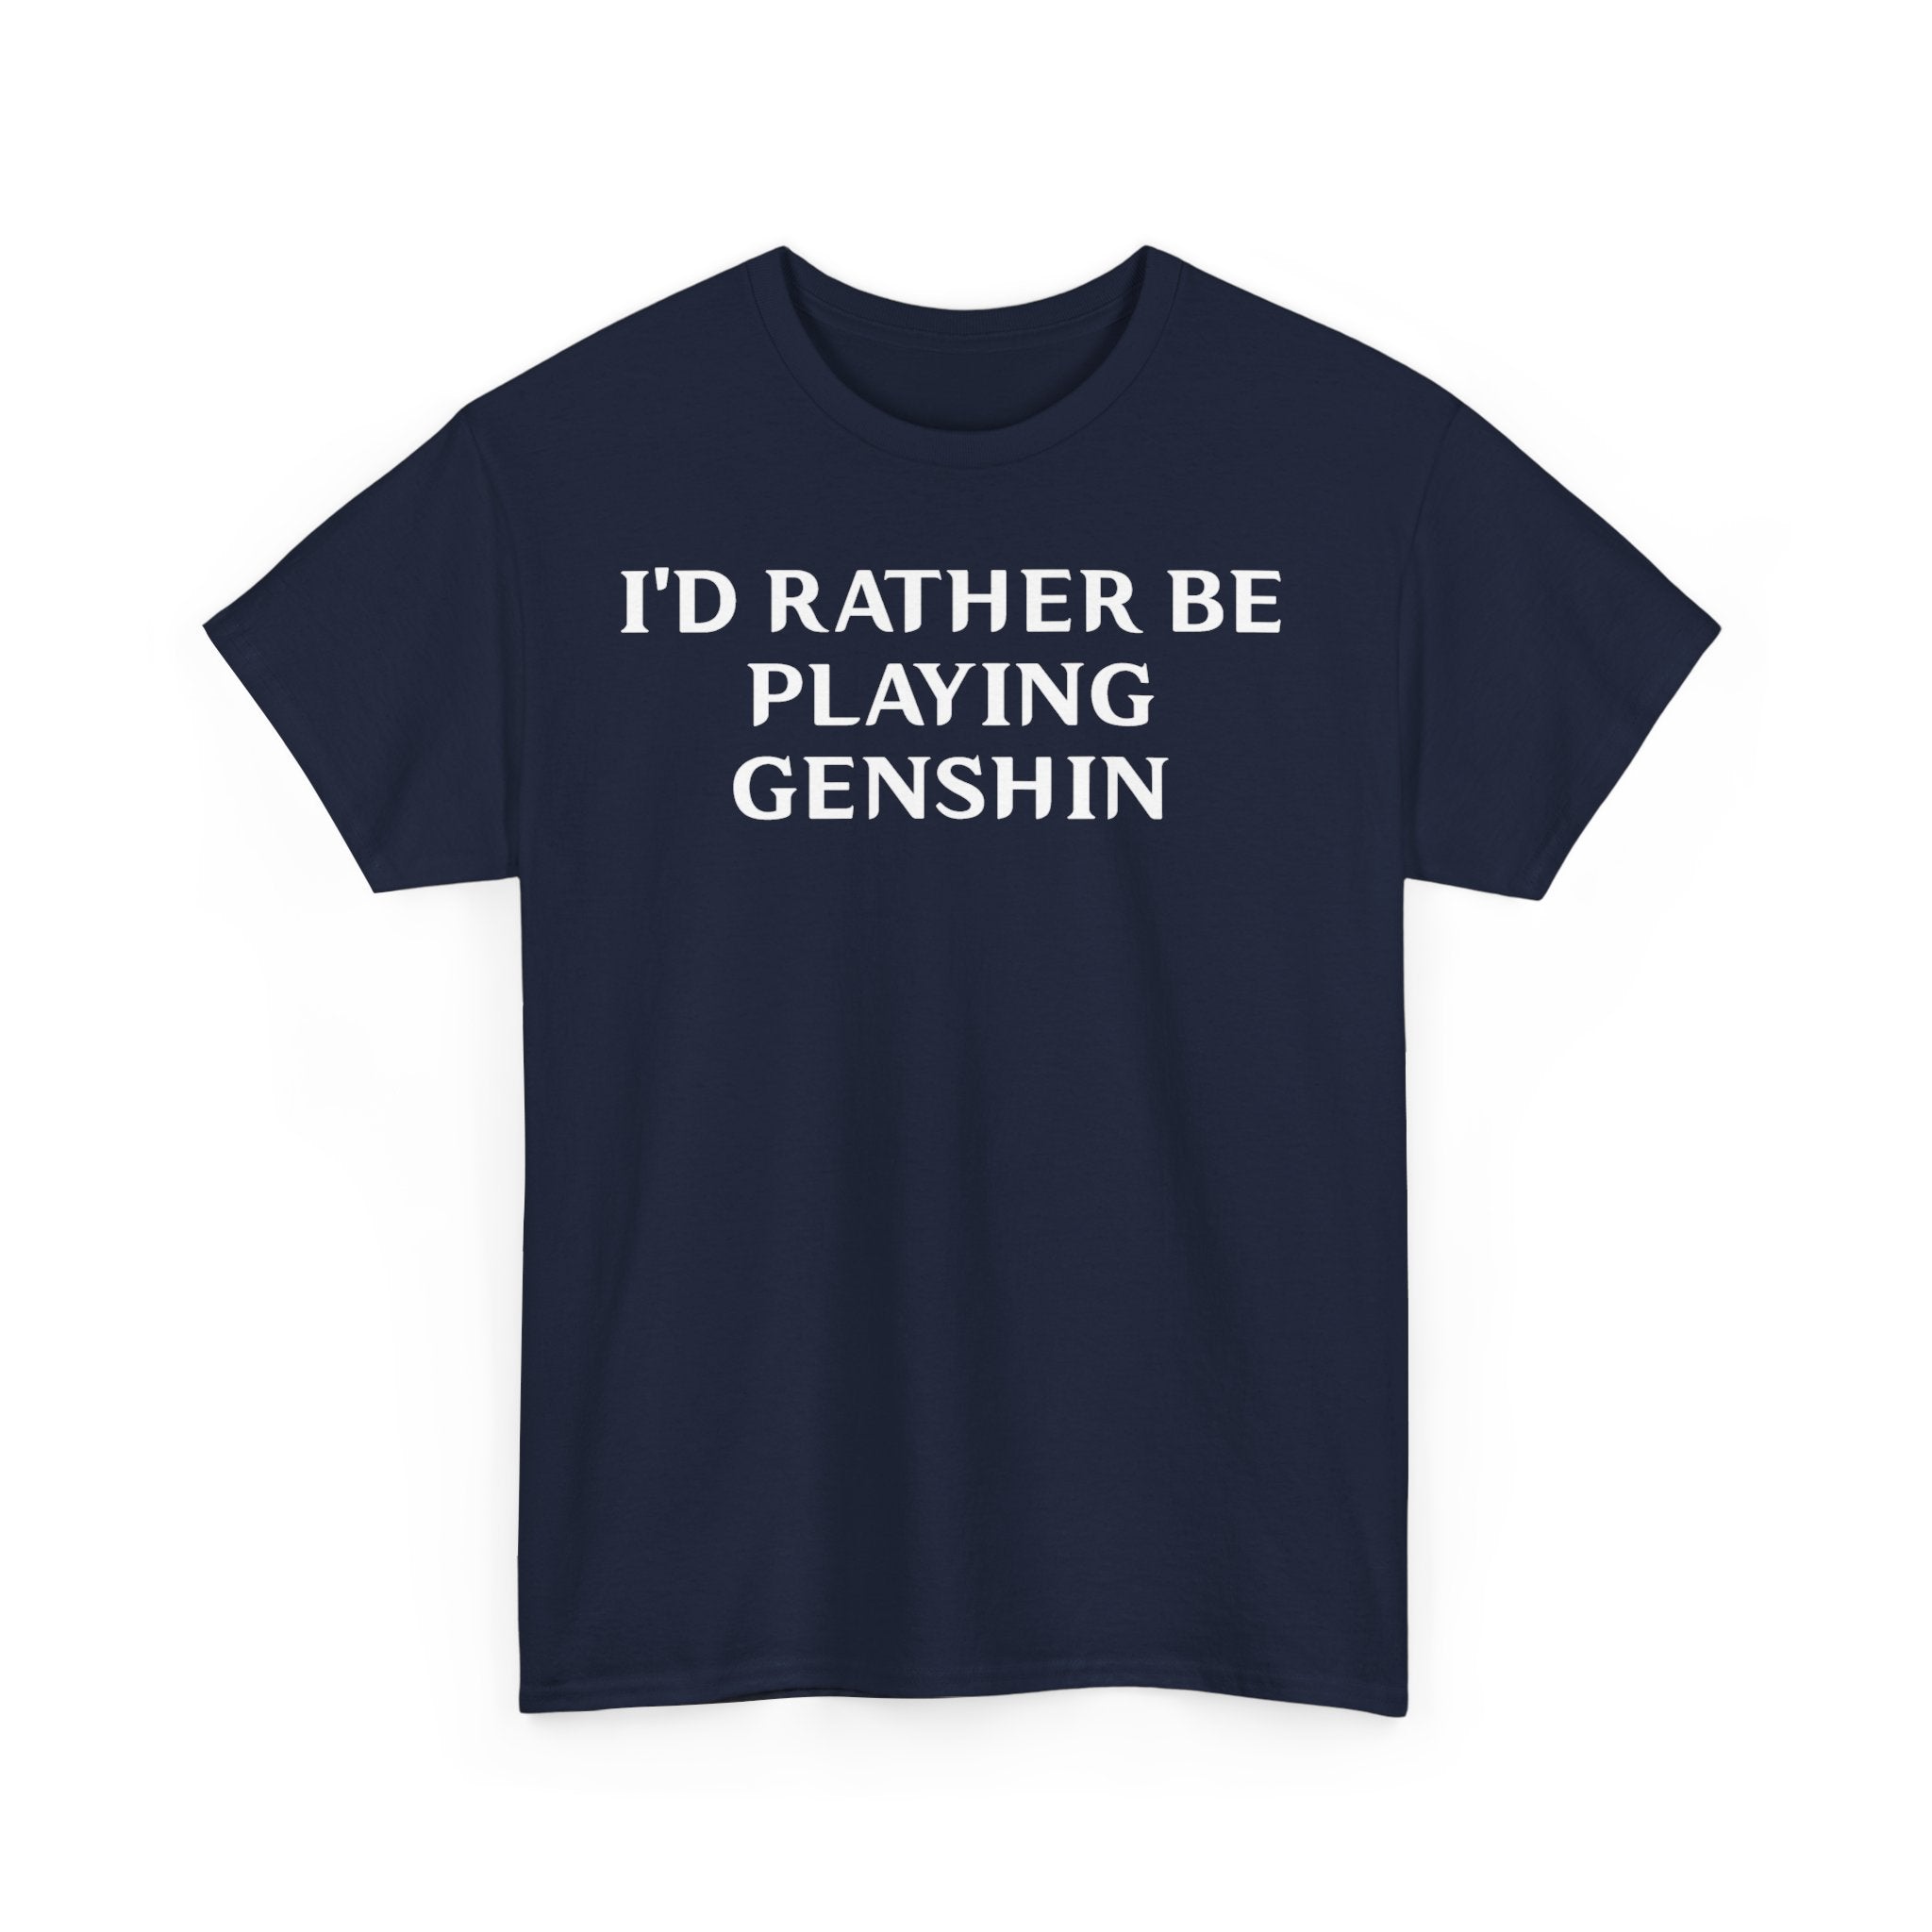 Genshin Impact I'd Rather Be Playing Unisex Heavy Cotton Tee Shirt Tshirt T-shirt Gamer Gift For Him Her Game Cup Cups Mugs Birthday Christmas Valentine's Anniversary Gifts